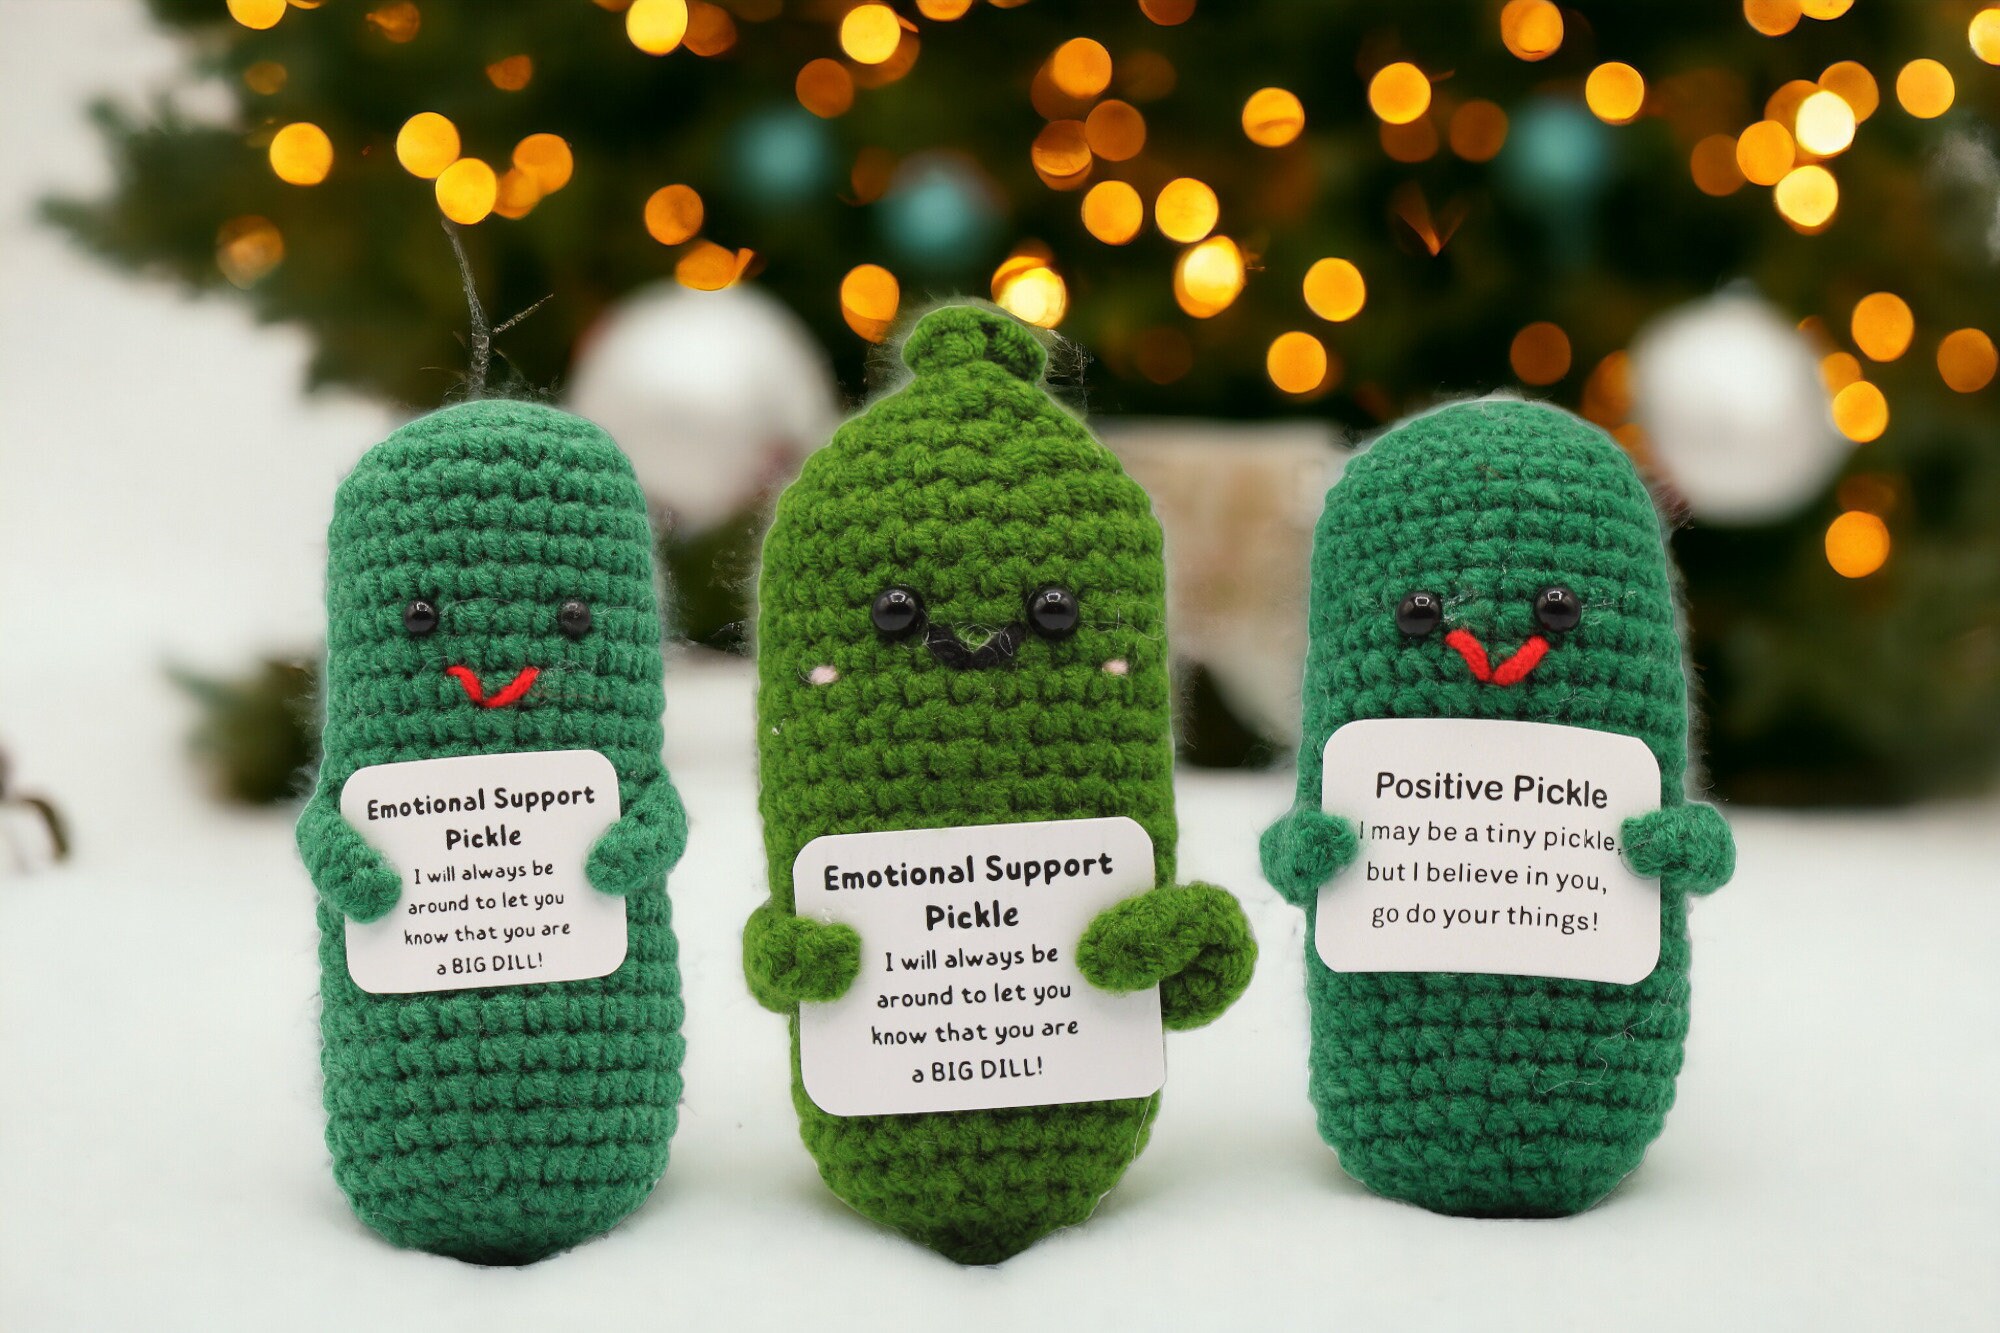 3 Pack Mini Funny Positive Potato, Cute Wool Funny Knitted